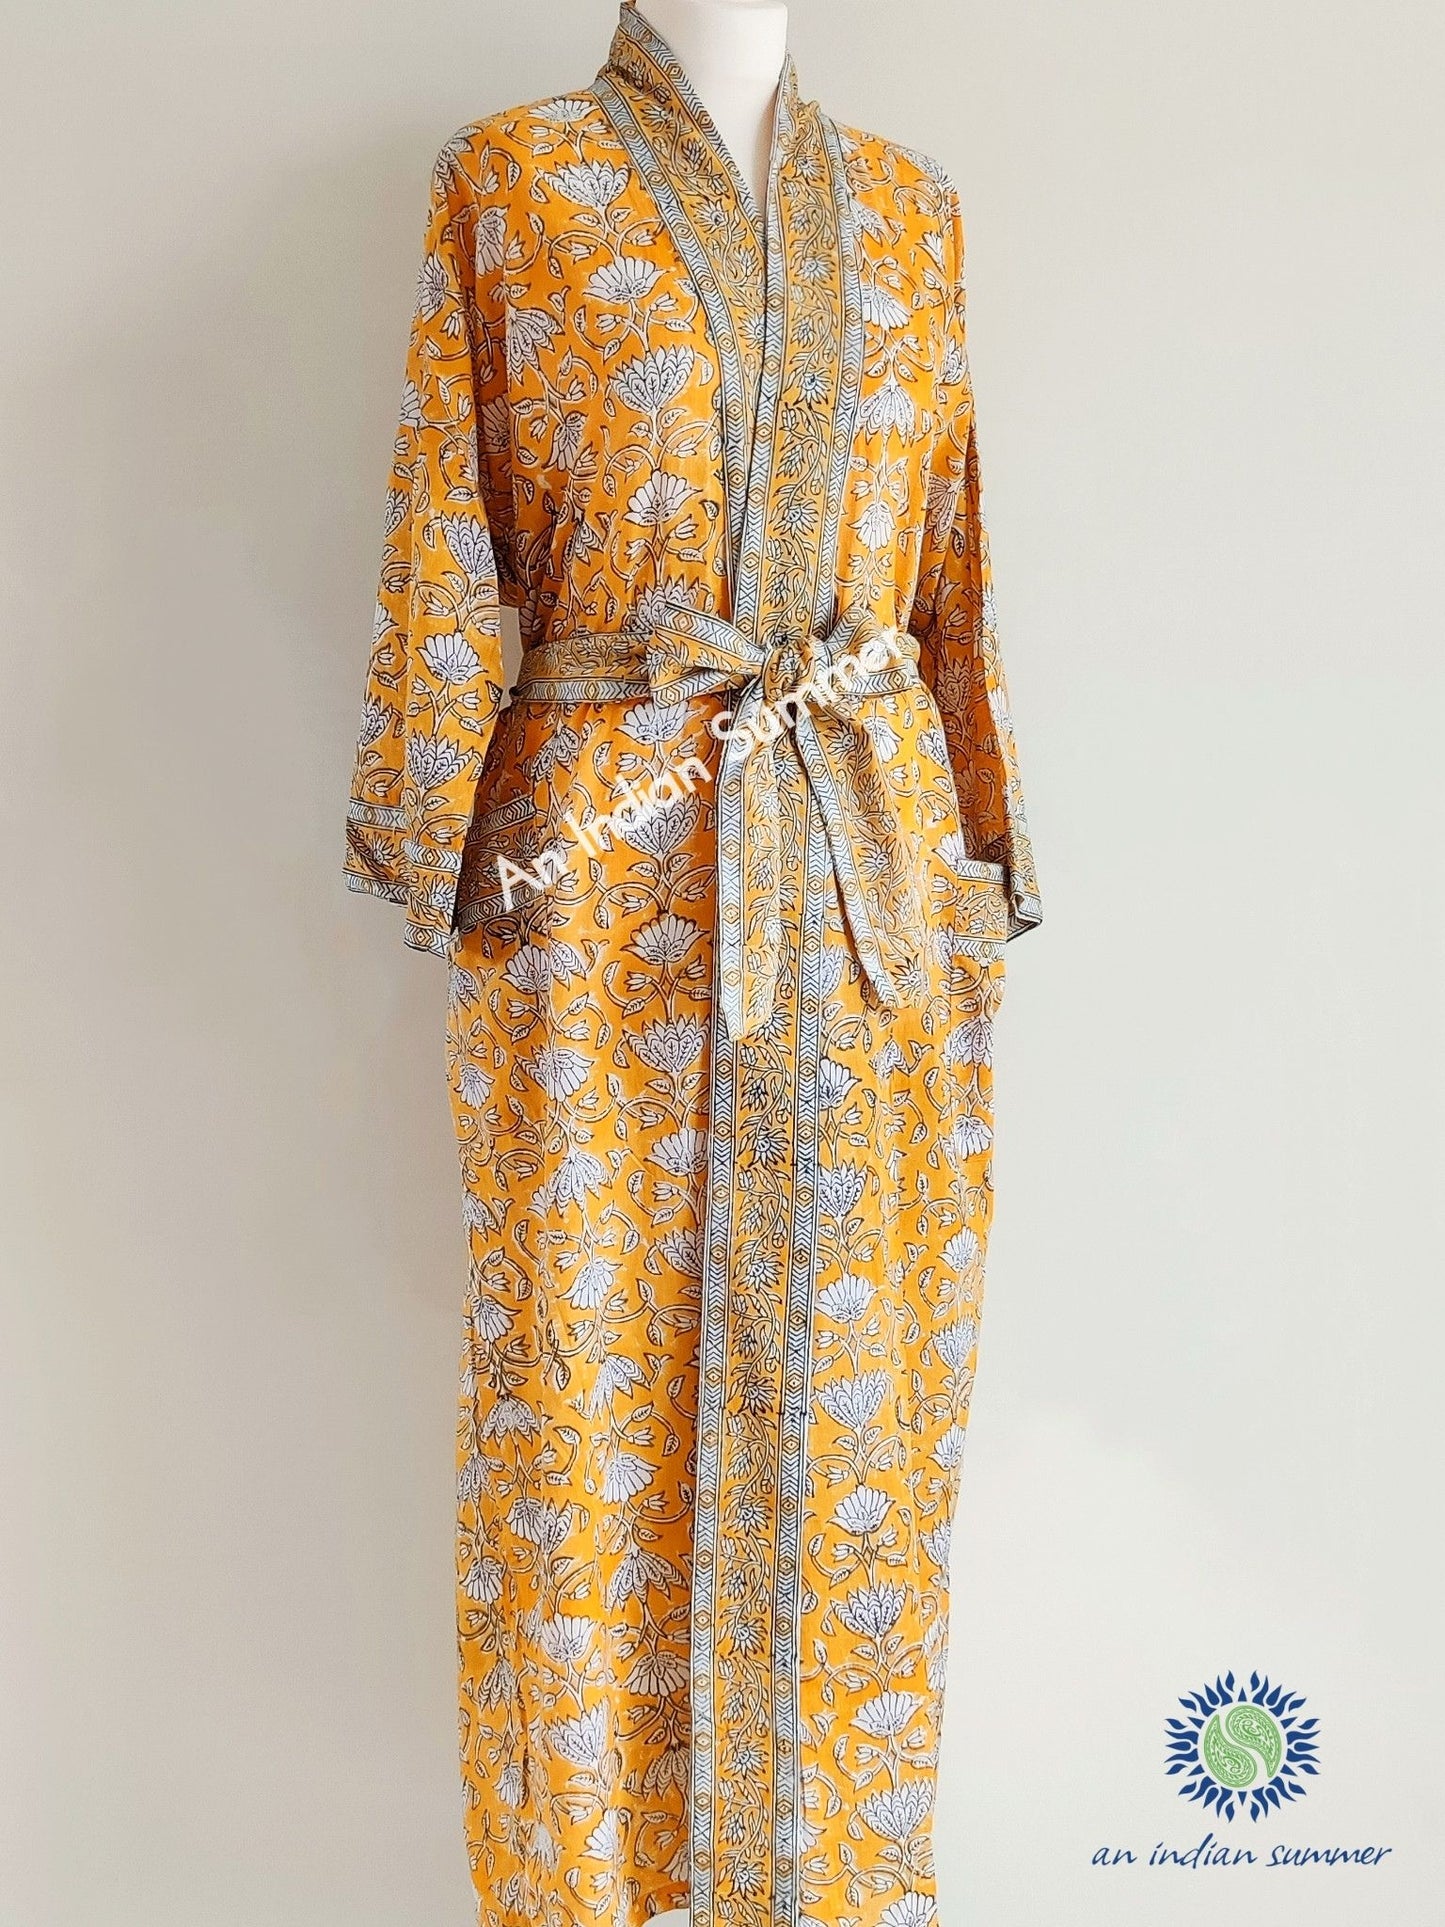 Long Kimono Robe | Lotus | Yellow | Floral Block Print | Hand Block Printed | Cotton Voile | An Indian Summer | Seasonless Timeless Sustainable Ethical Authentic Artisan Conscious Clothing Lifestyle Brand